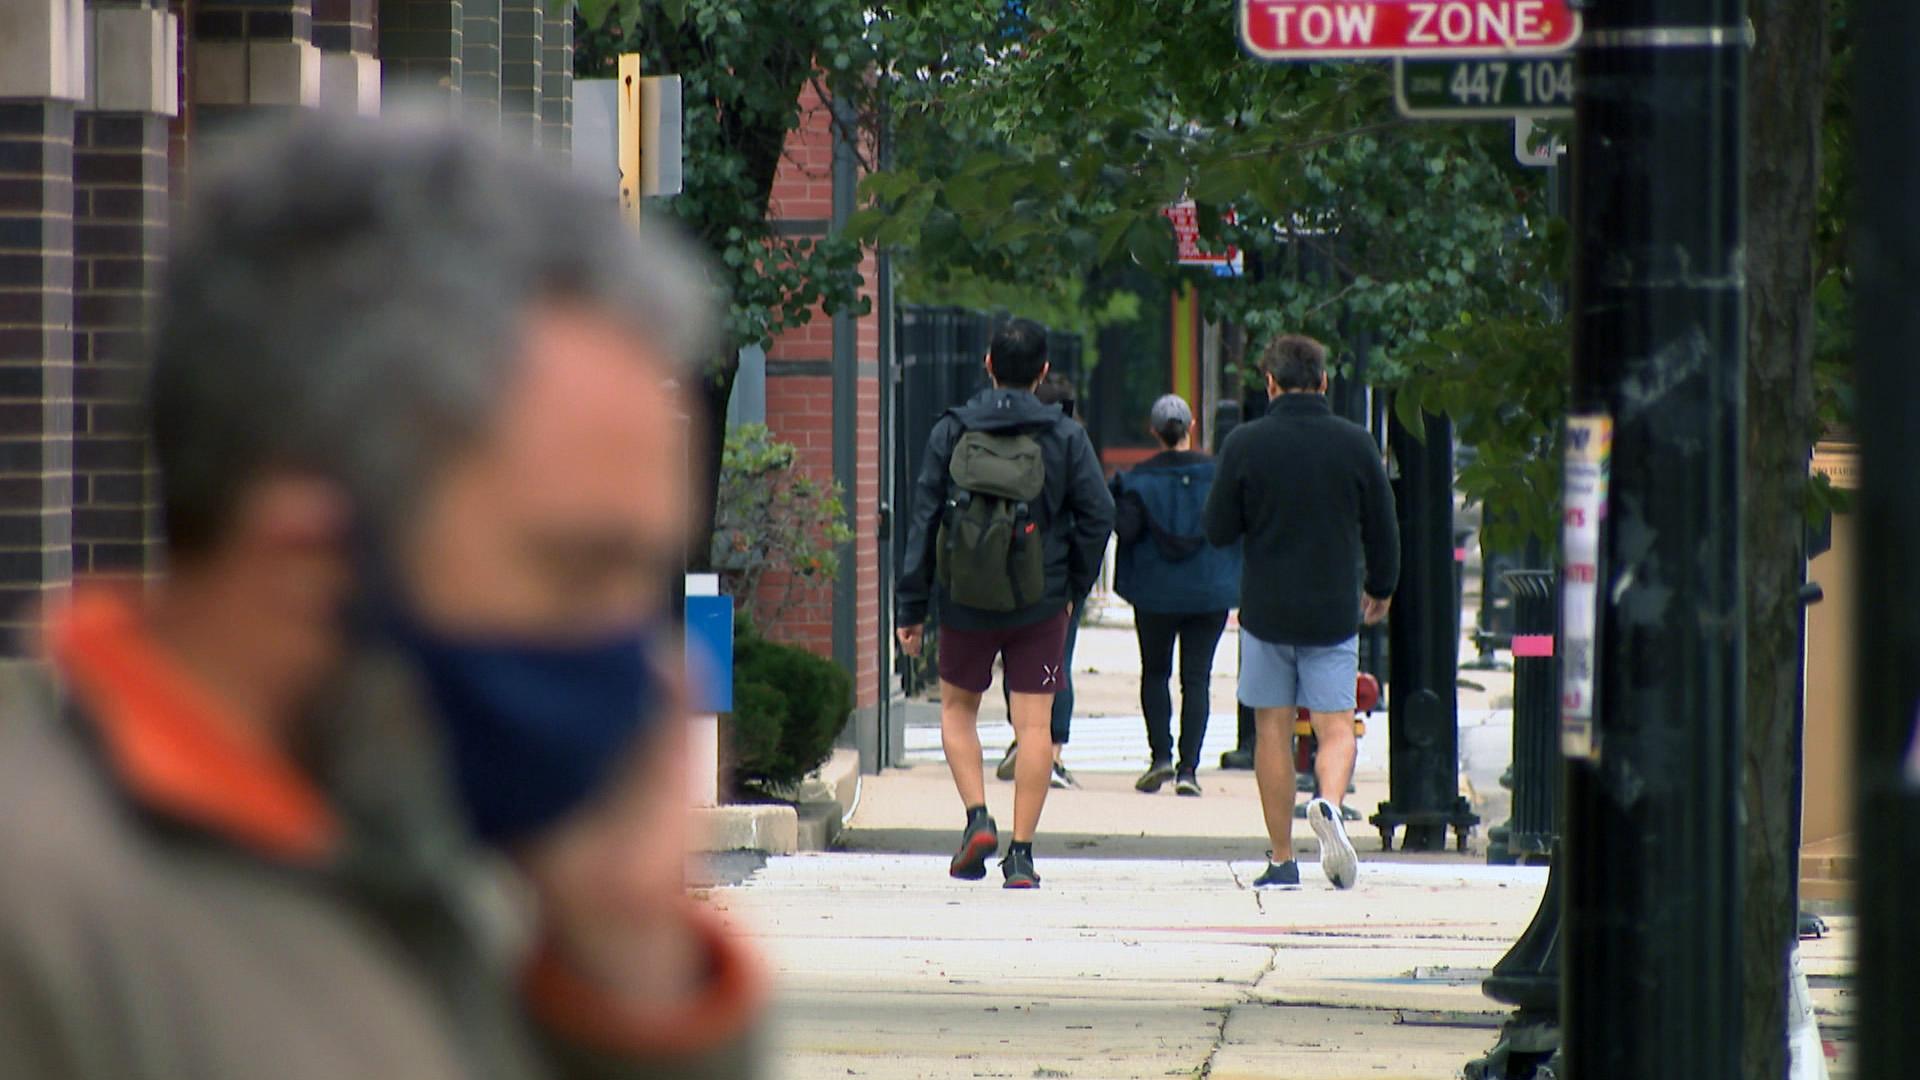 Pedestrians in Chicago’s Northalsted neighborhood on a September day. (WTTW News)